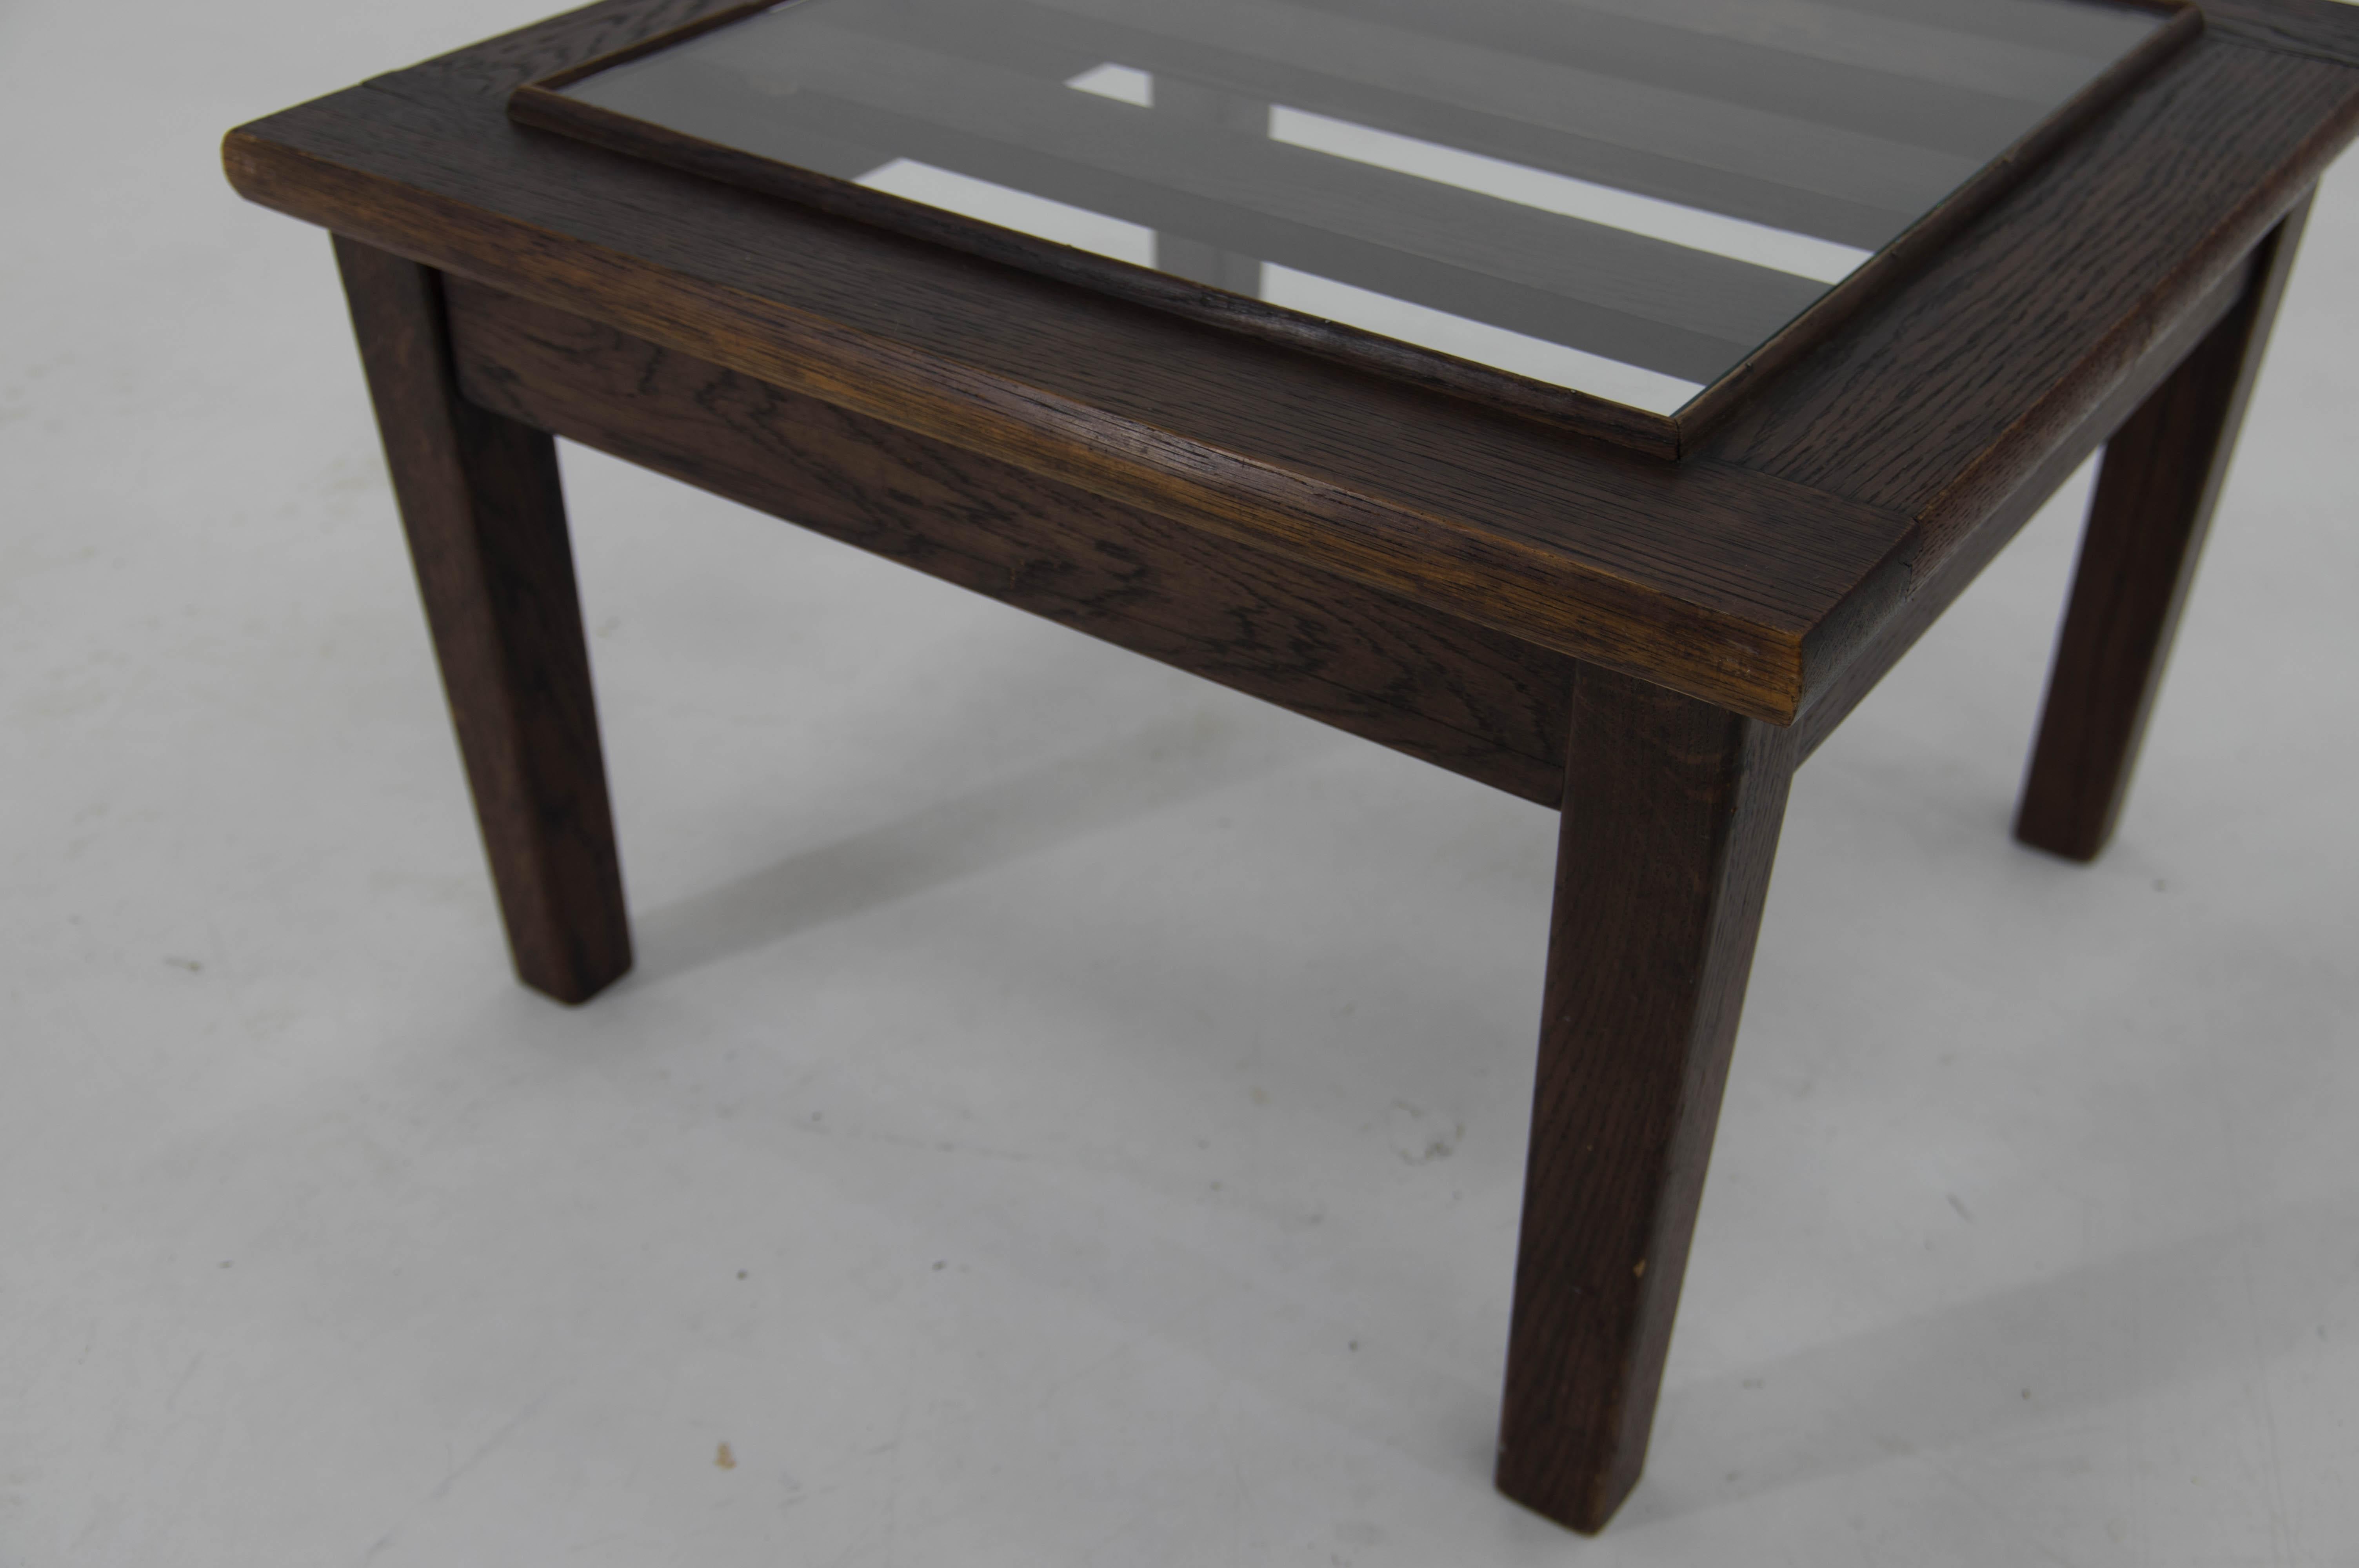 Rare Functionalist Side Table by Antonin Heythum, 1930s For Sale 2